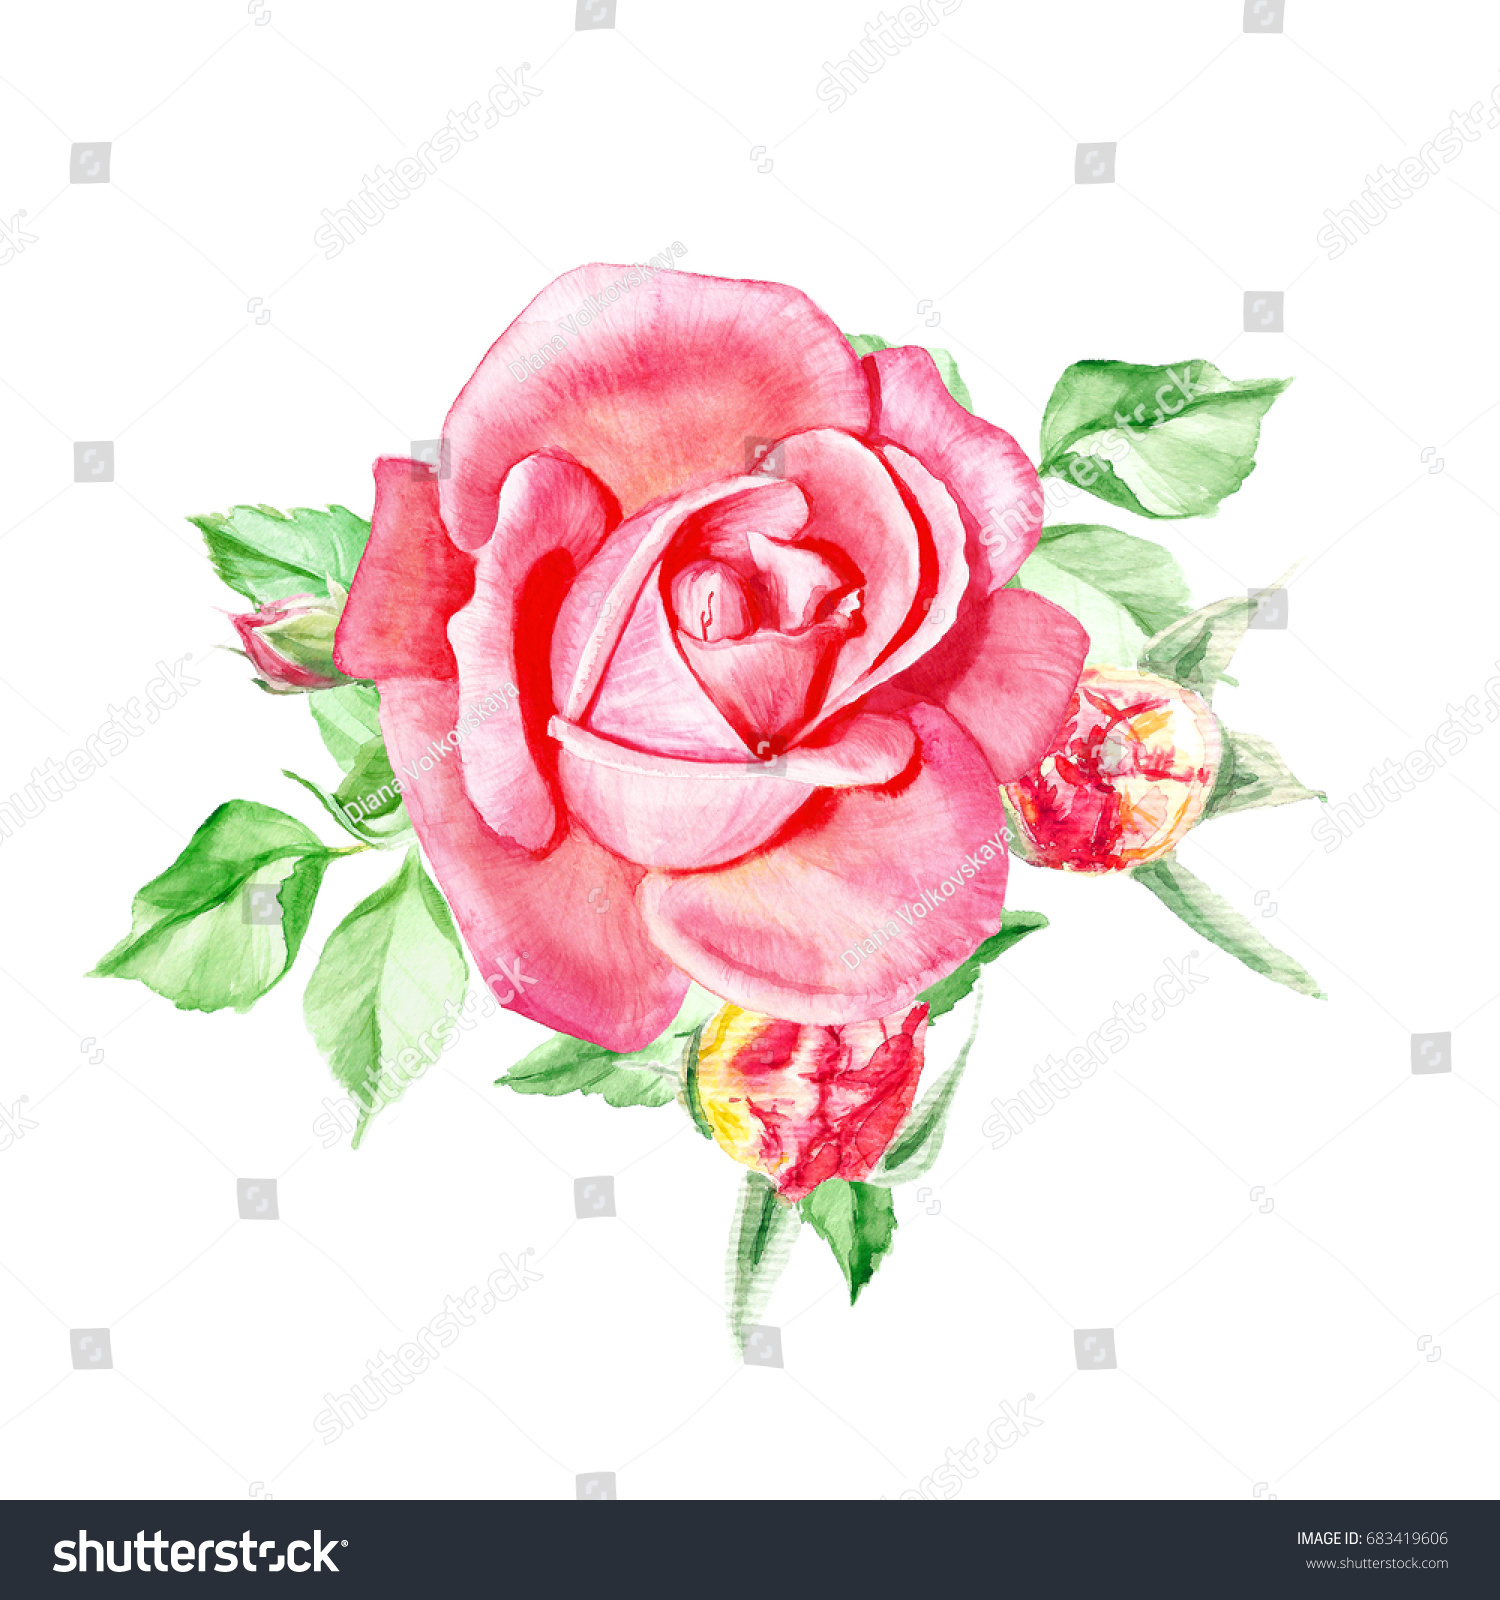 One Pink Rose Buds Watercolor Painting Stock Illustration 683419606 ...